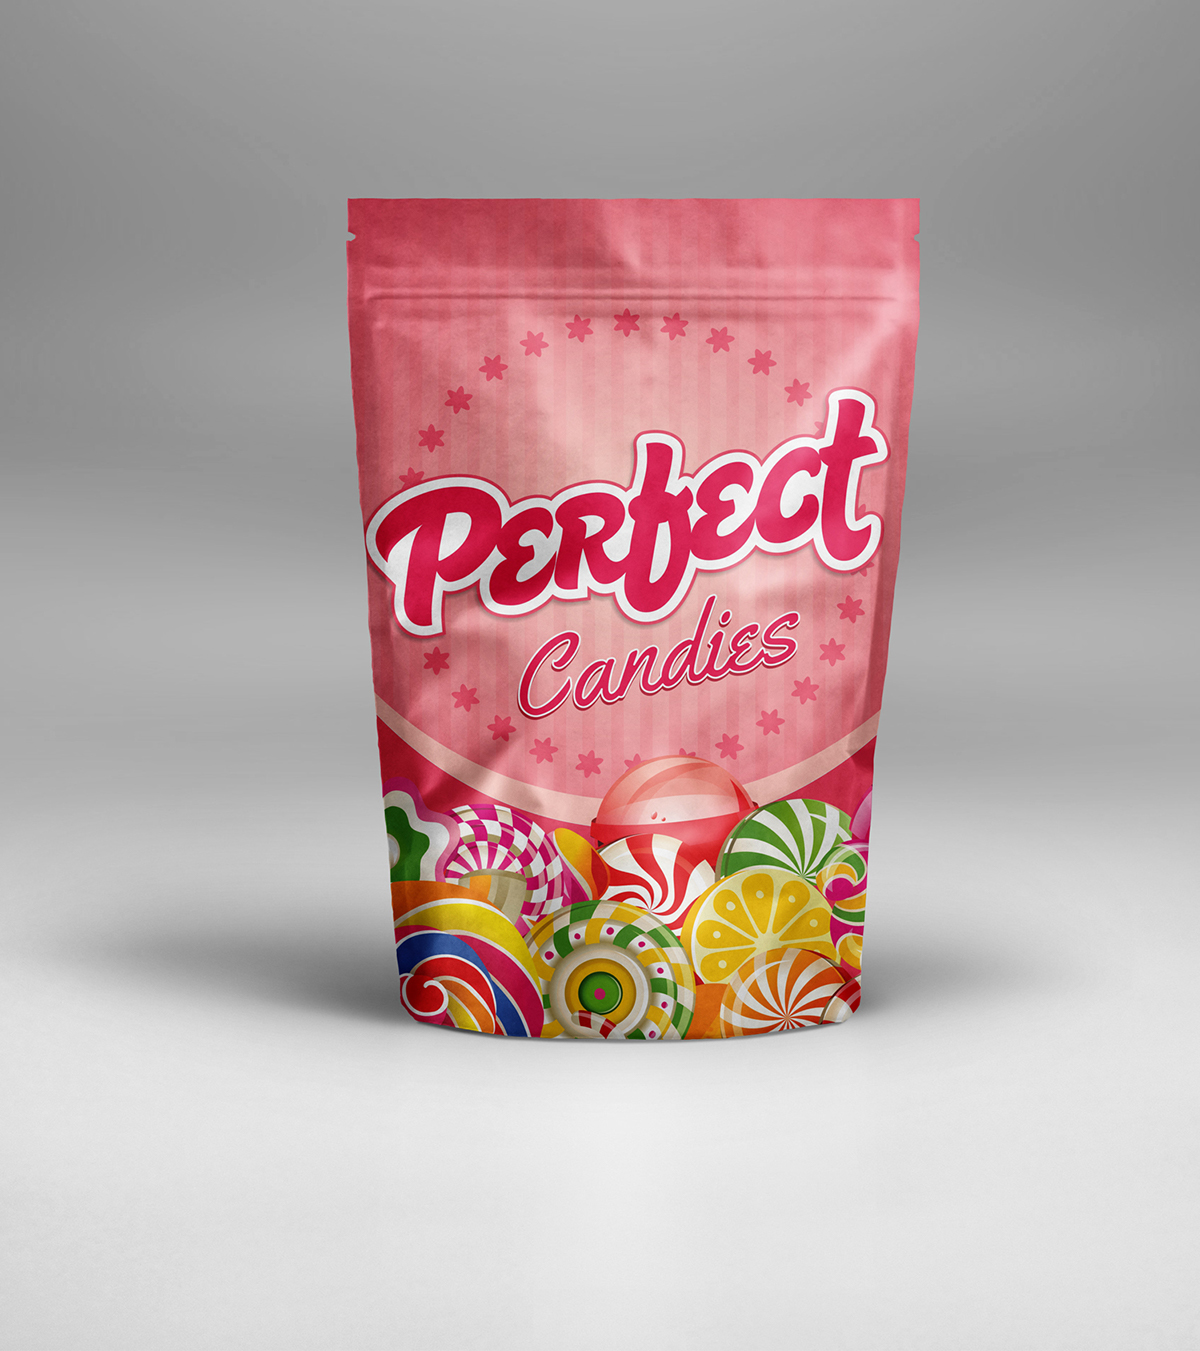 candies packaging Perfect Candies Candies kids pink Toffees  Lolipops pouch Candy sweet chew Fruit children child healthy